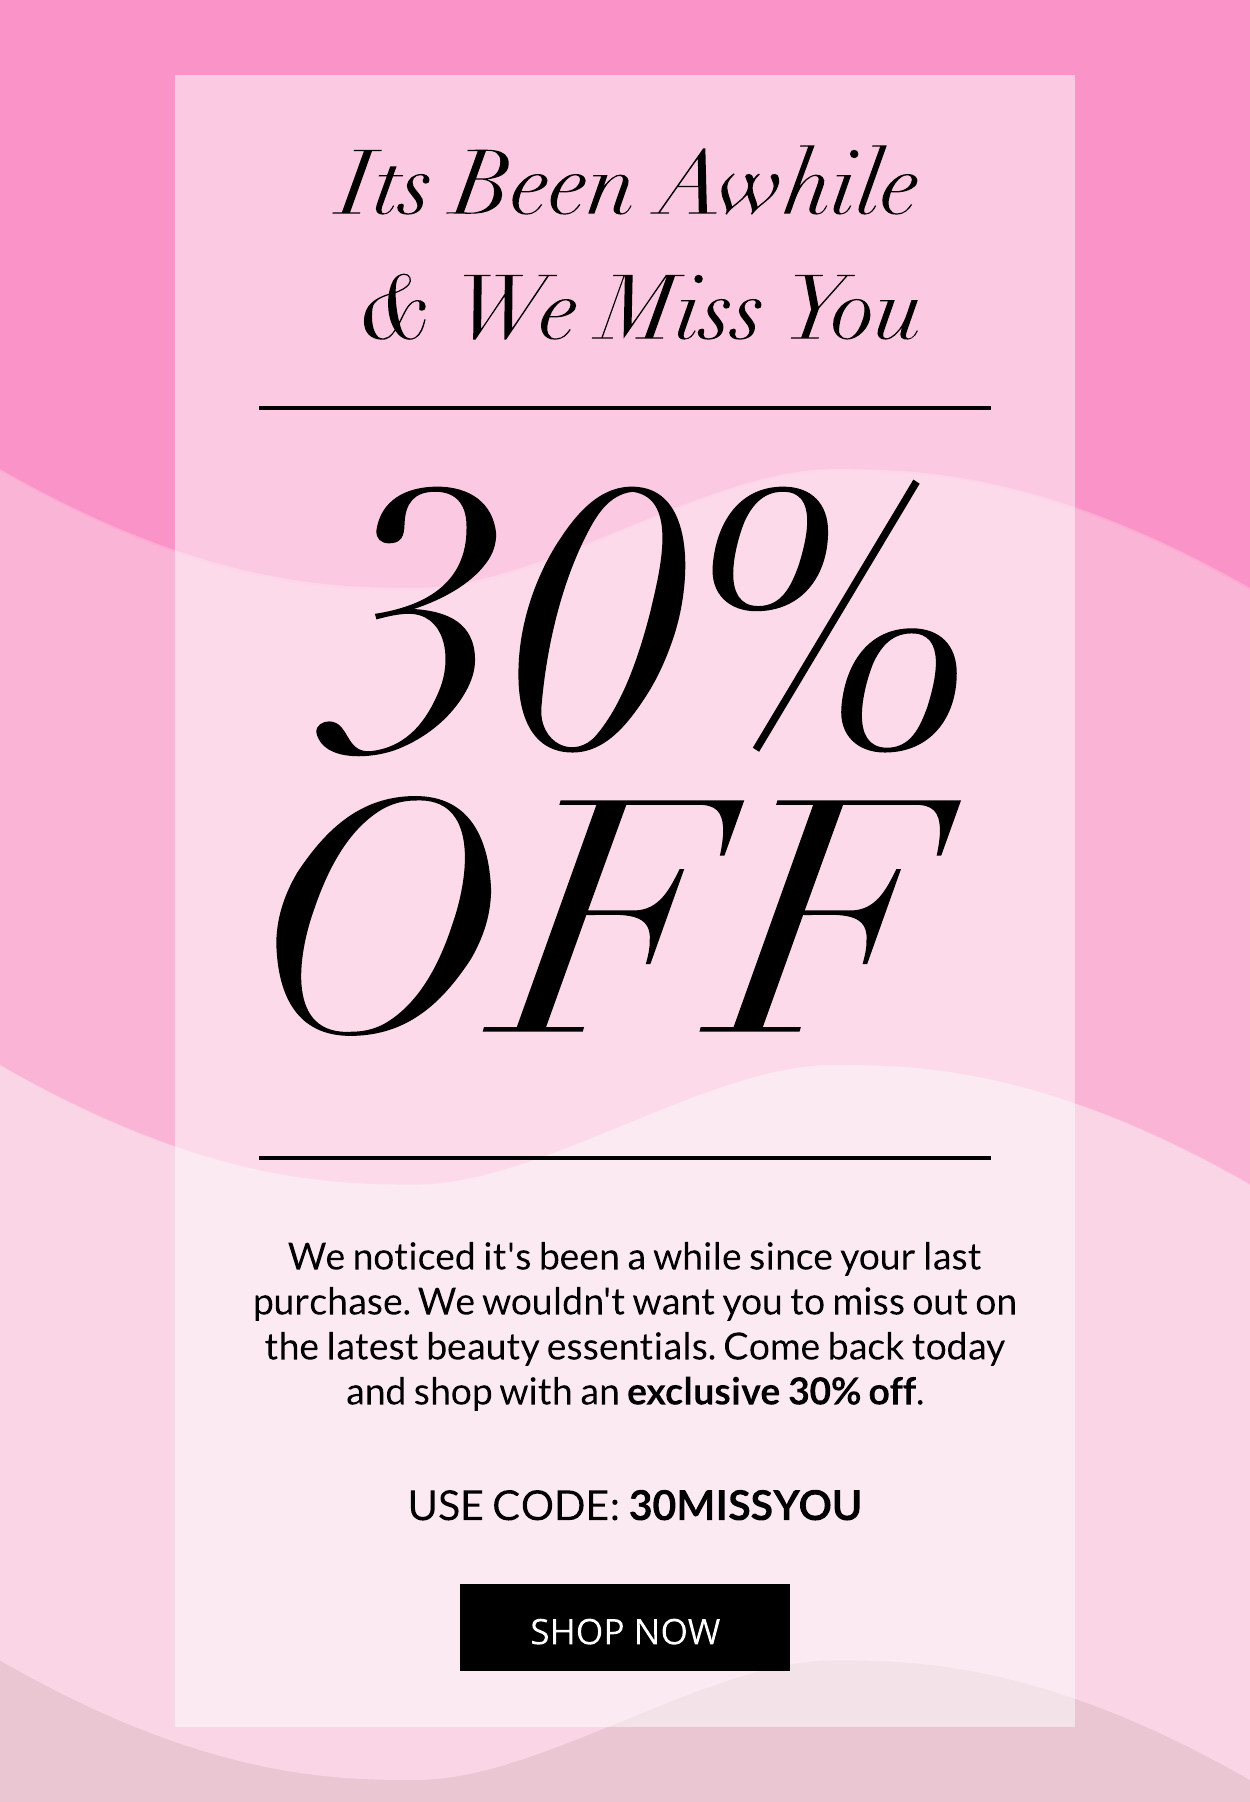 We Miss You Save 30%